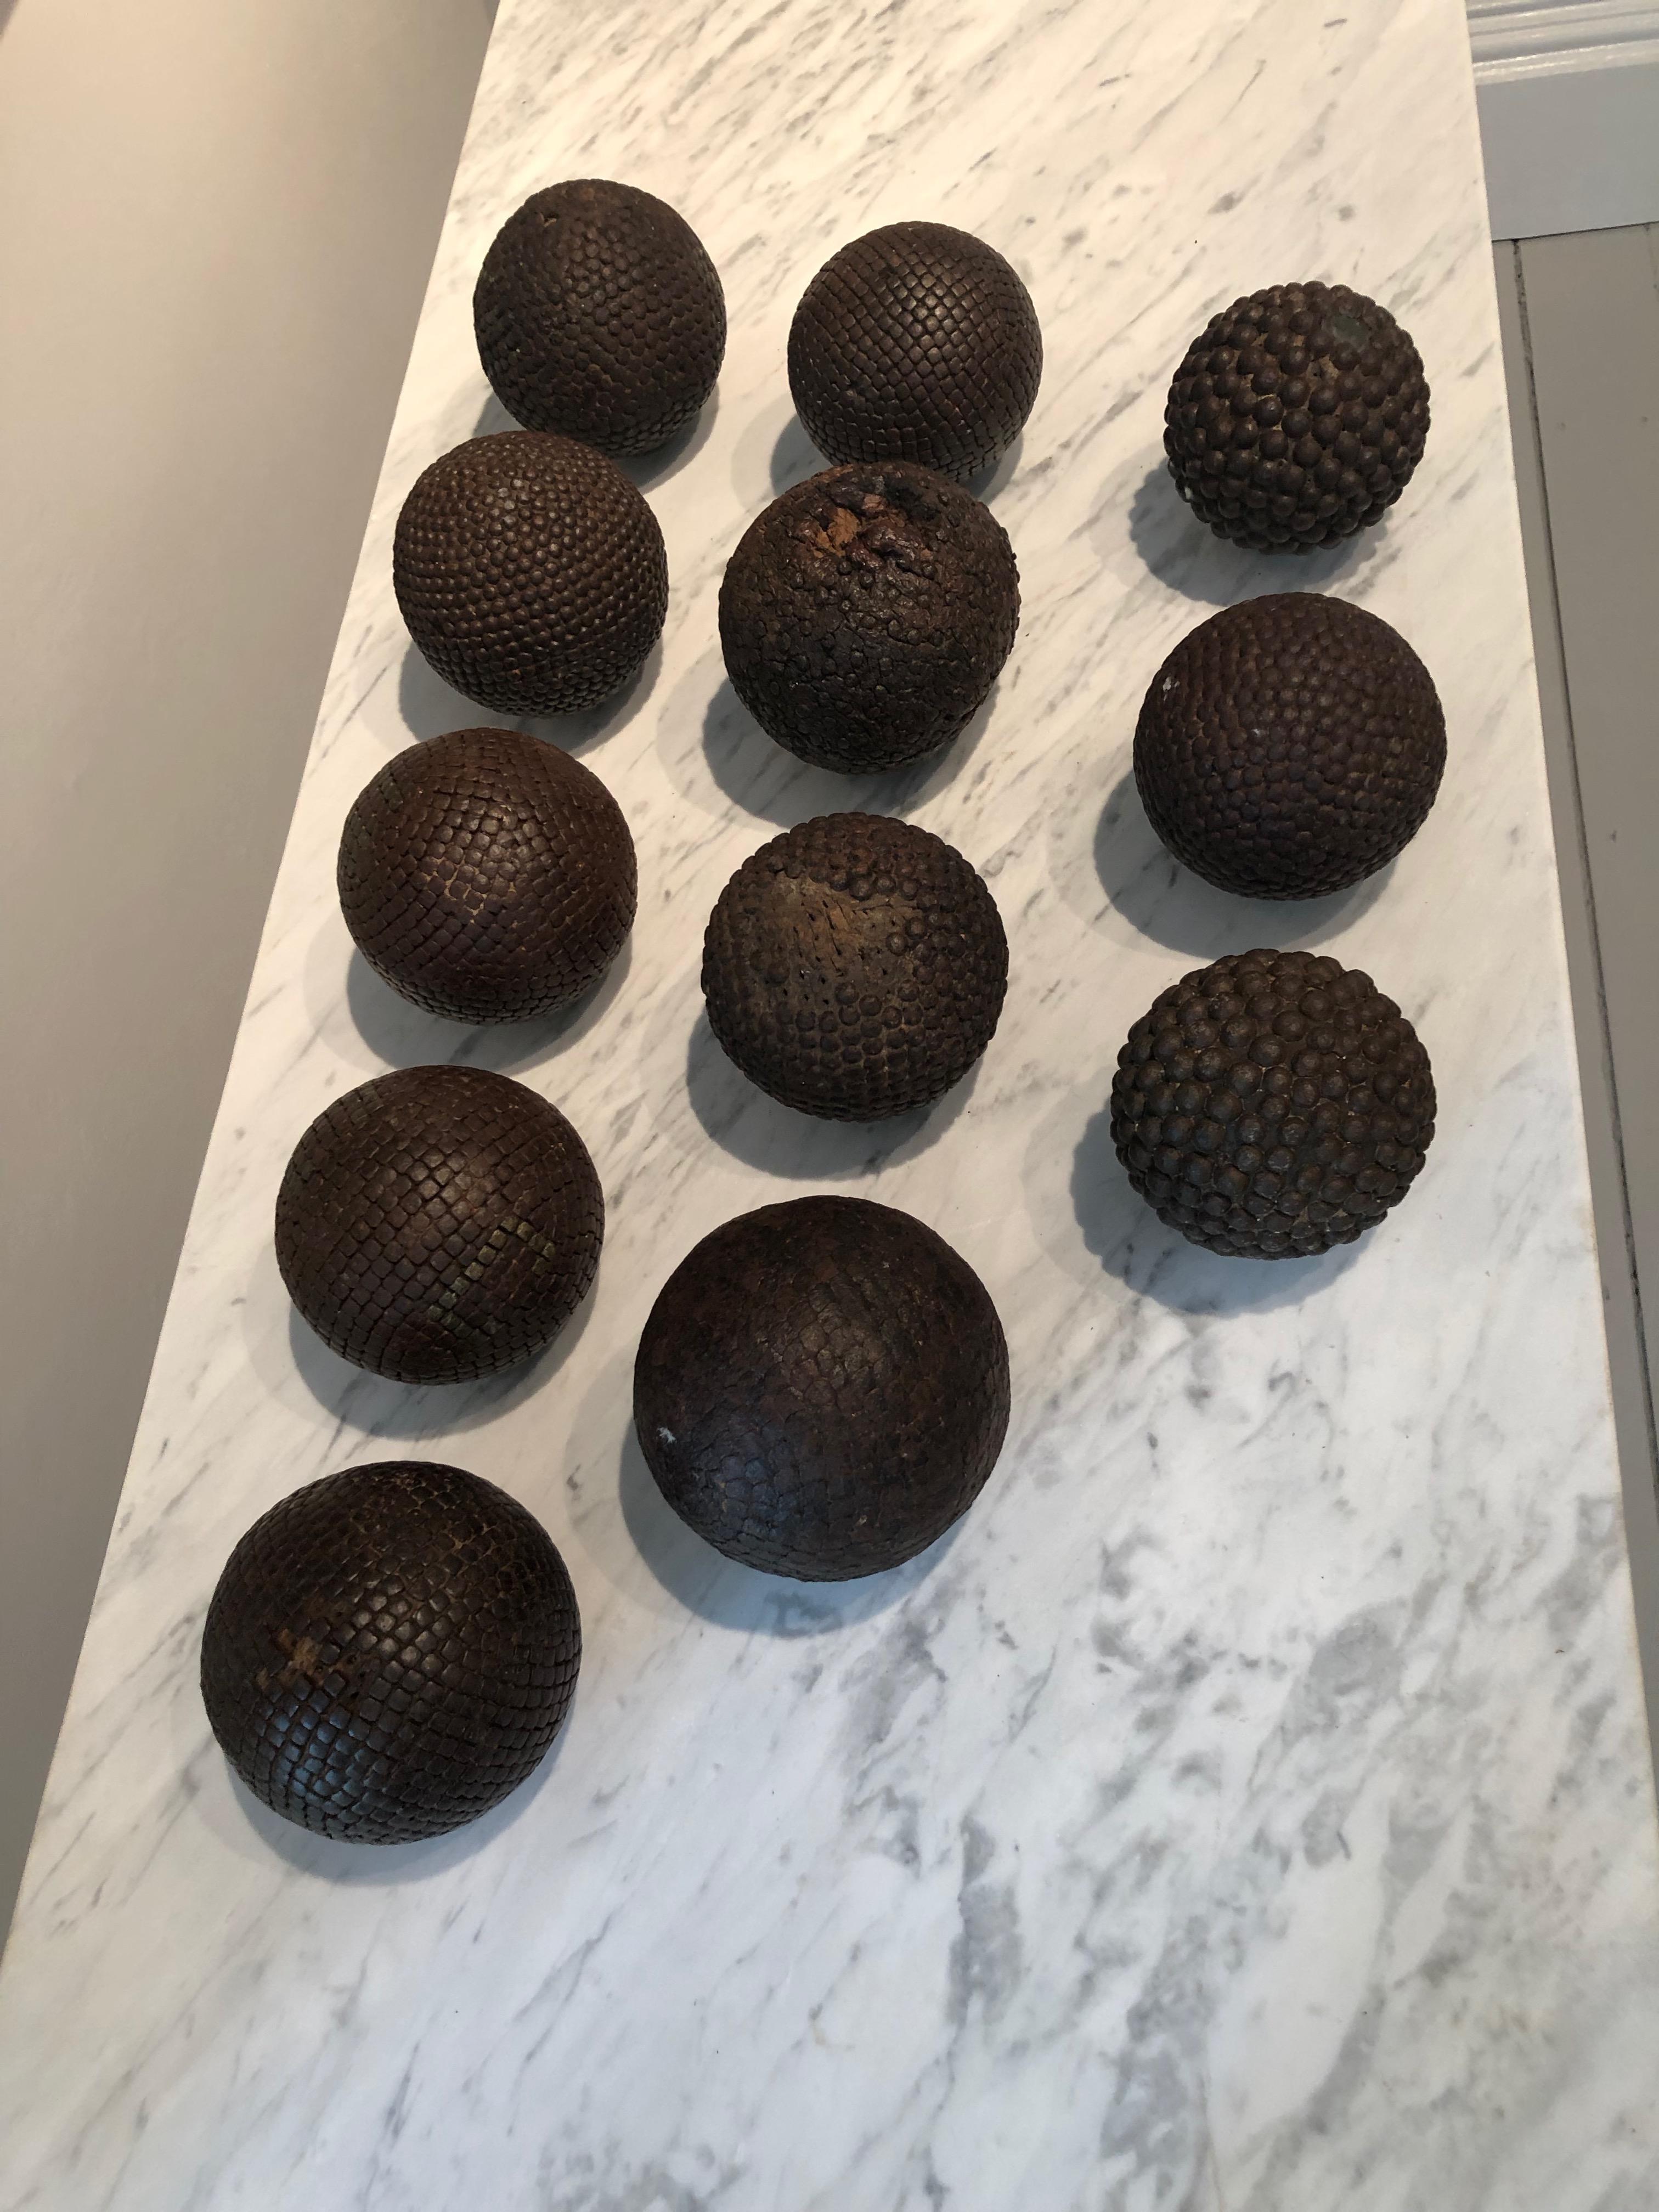 Boules are used to play Pétanque, the French equivalent of Boccé, and this collections is stunning. Made from wood (likely walnut) and iron studs and dating to the 1840s, the set comprises two different sizes, nine larger and two smaller boules, and